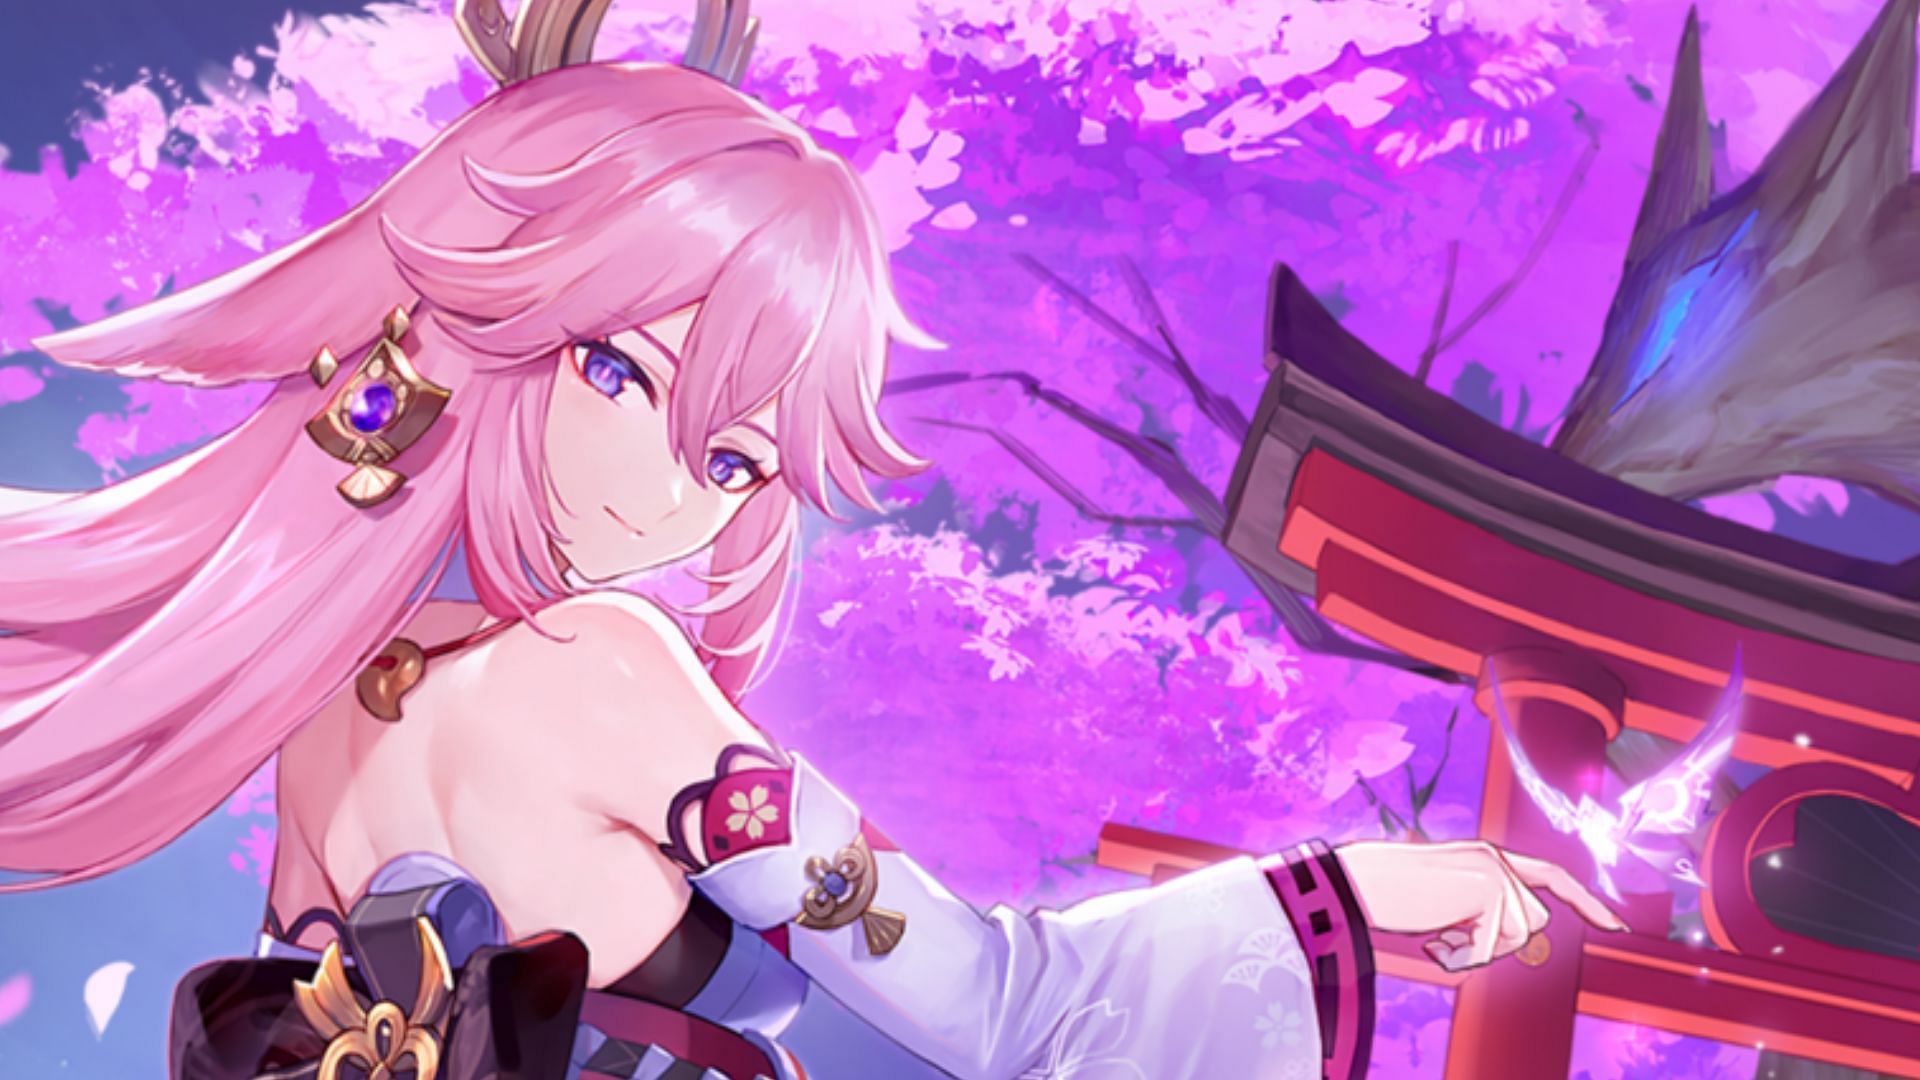 Yae Miko is the only new character in update 2.5 (Image via miHoYo)